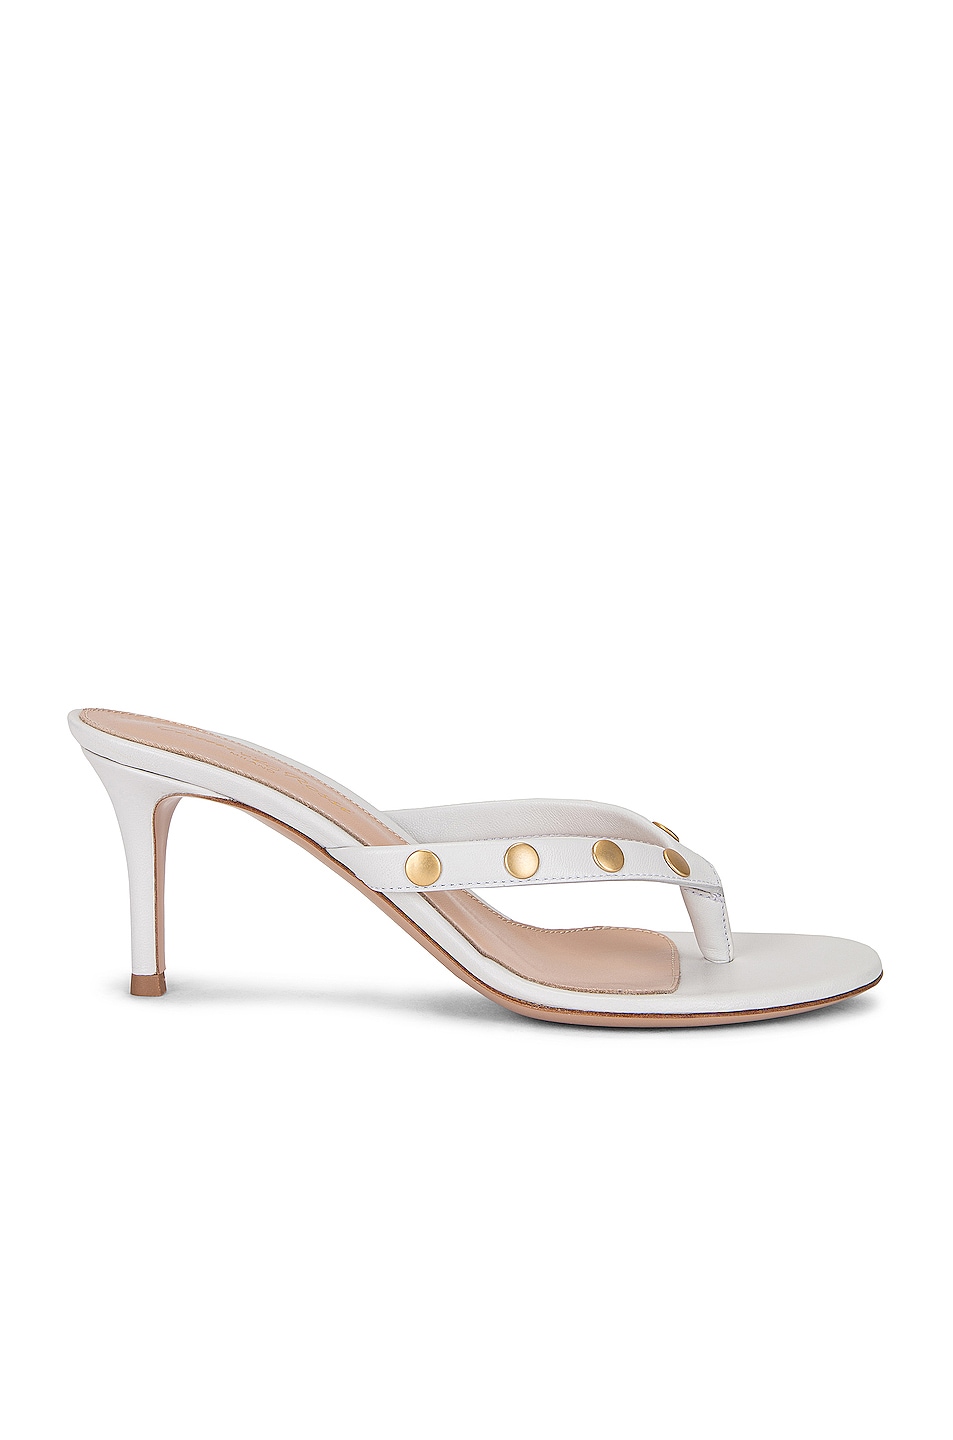 Image 1 of Gianvito Rossi Stud Thong Sandals in White